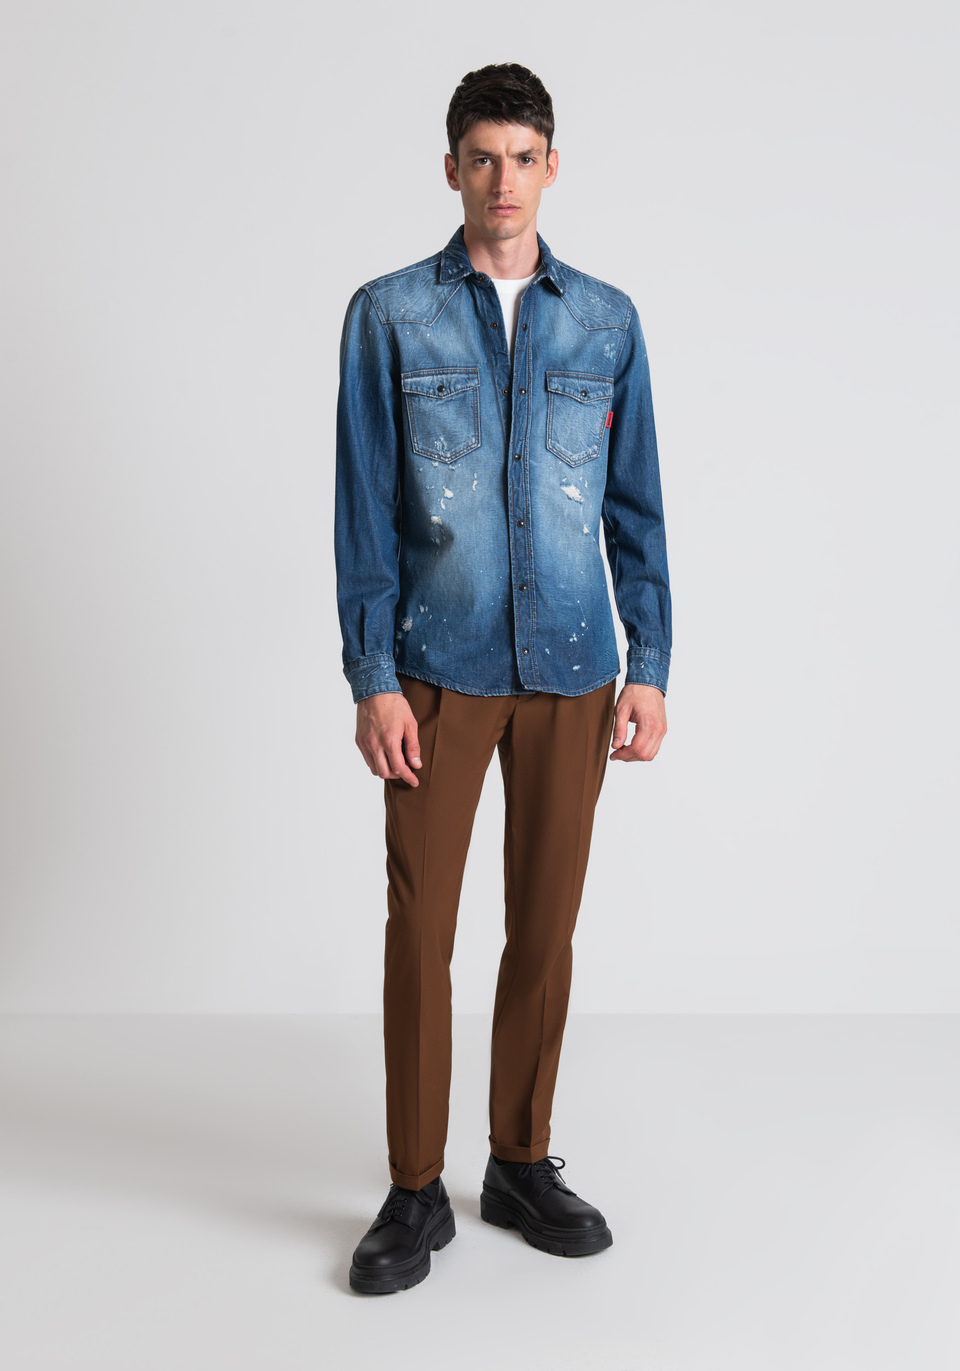 SLIM-FIT SHIRT IN USED-EFFECT DENIM WITH DISTRESSED DETAILS - Antony Morato Online Shop